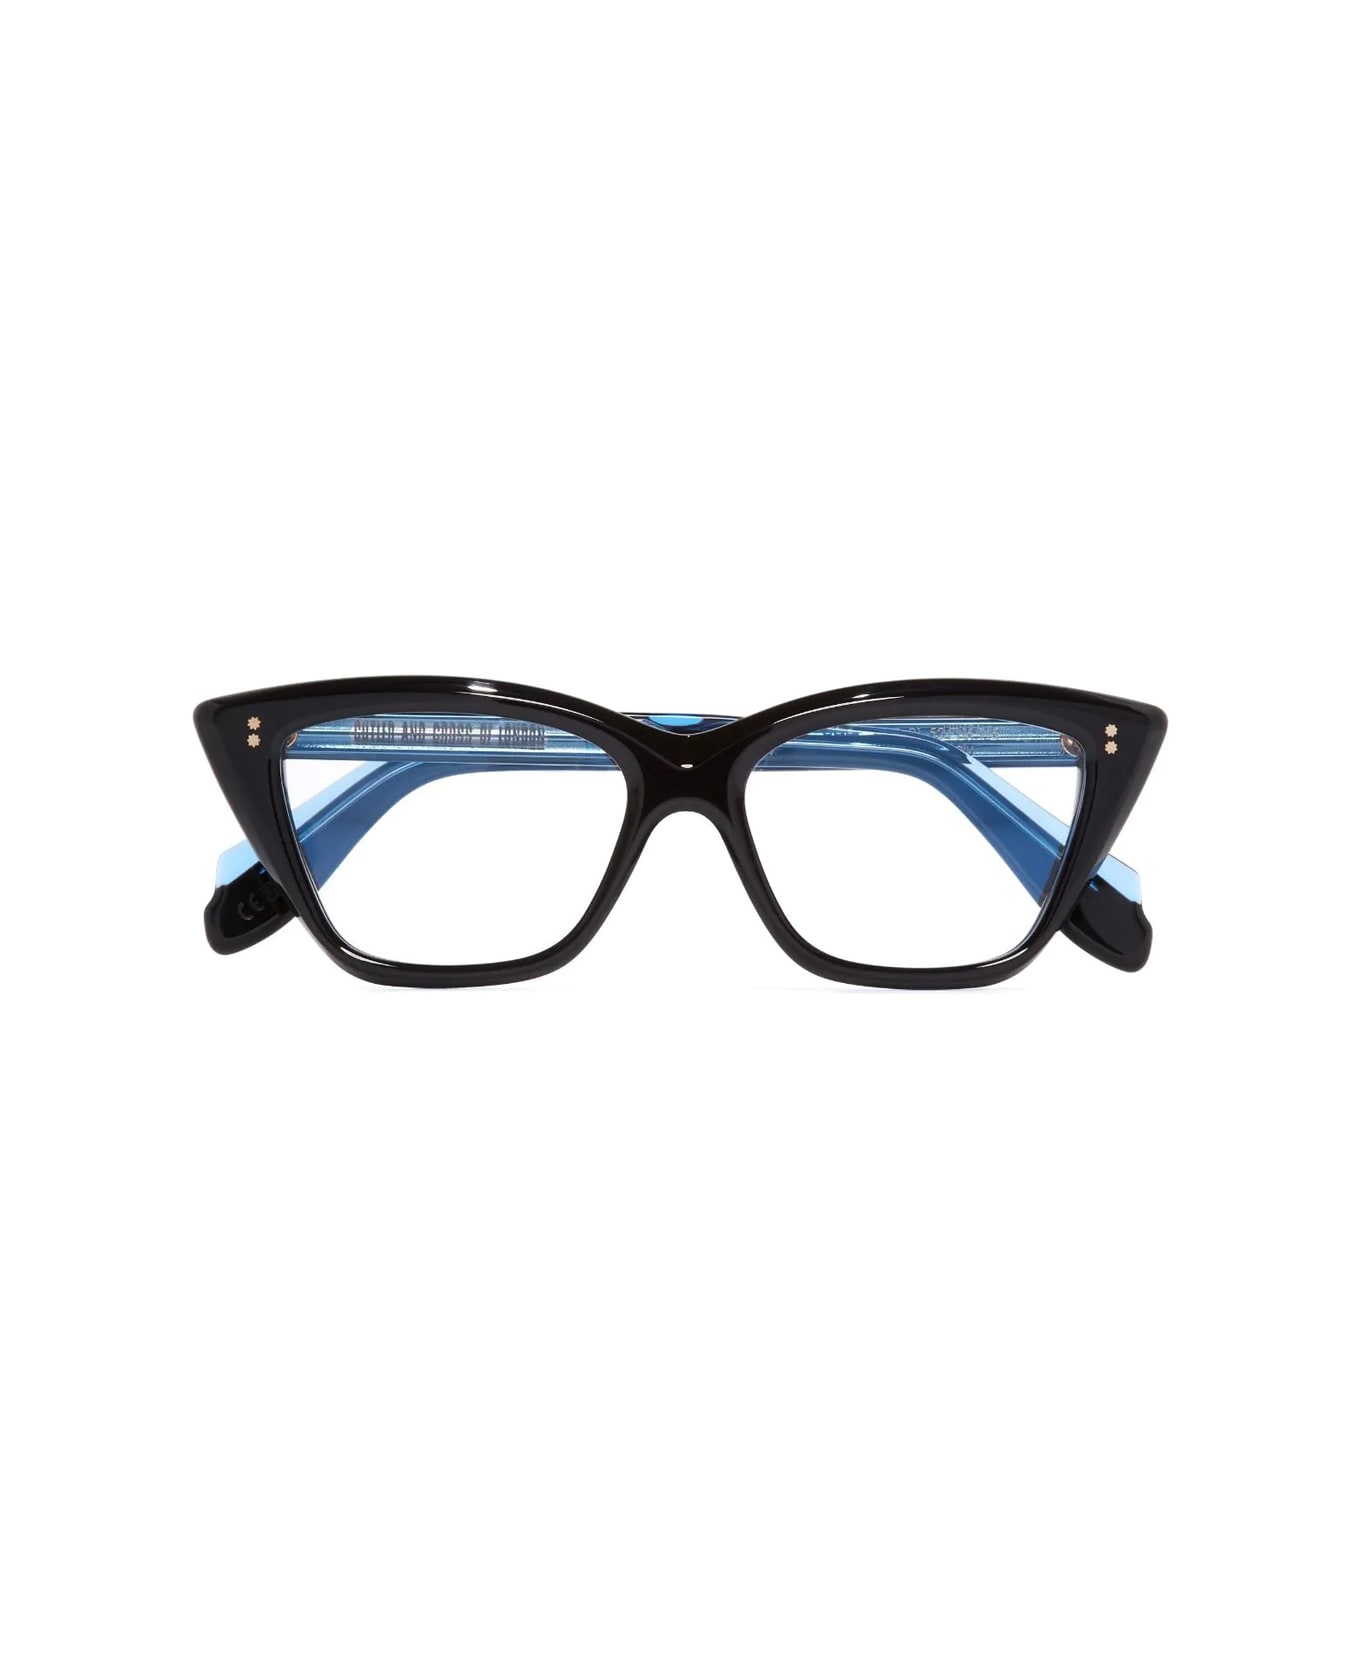 Cutler and Gross 9241 01 Blue On Black Glasses - Nero